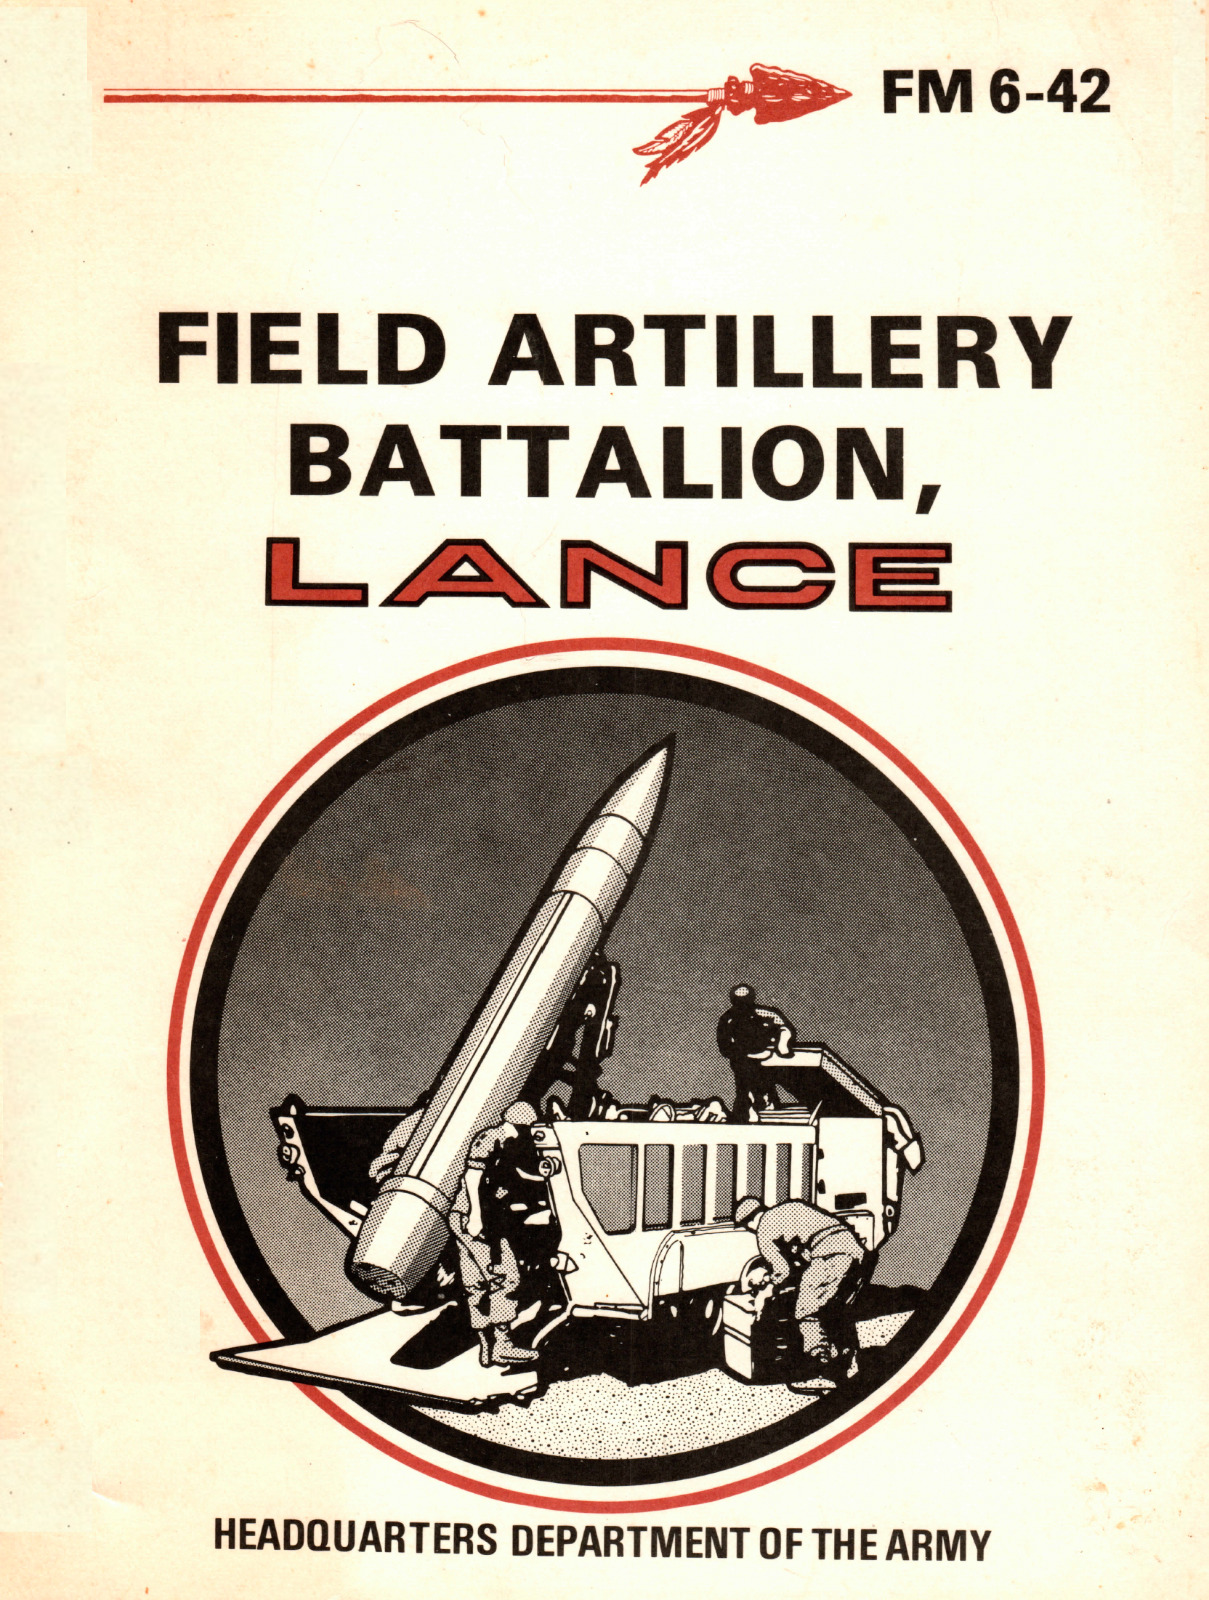 210 Page 1978 FM 6-42 FIELD ARTILLERY BATTALION LANCE Missile Book on Data CD